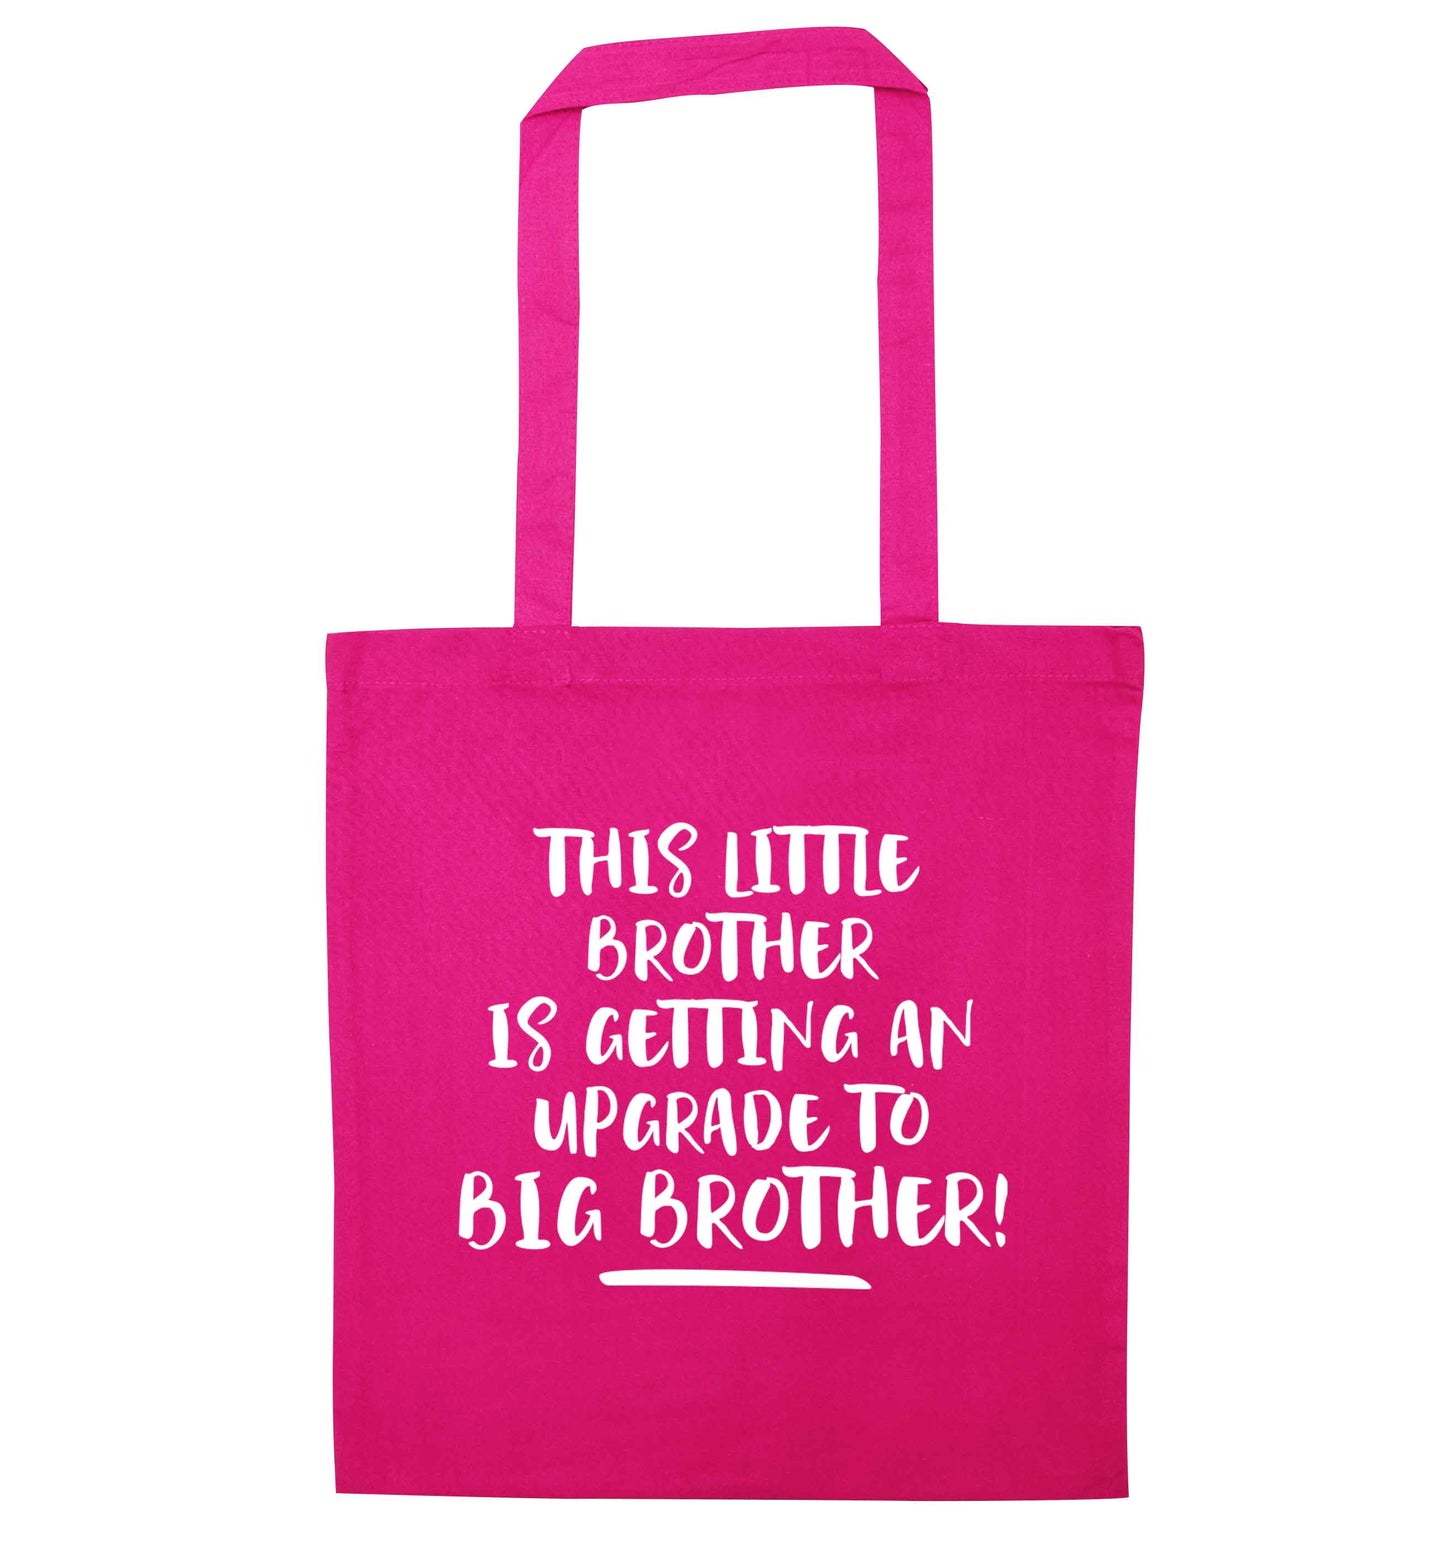 This little brother is getting an upgrade to big brother! pink tote bag